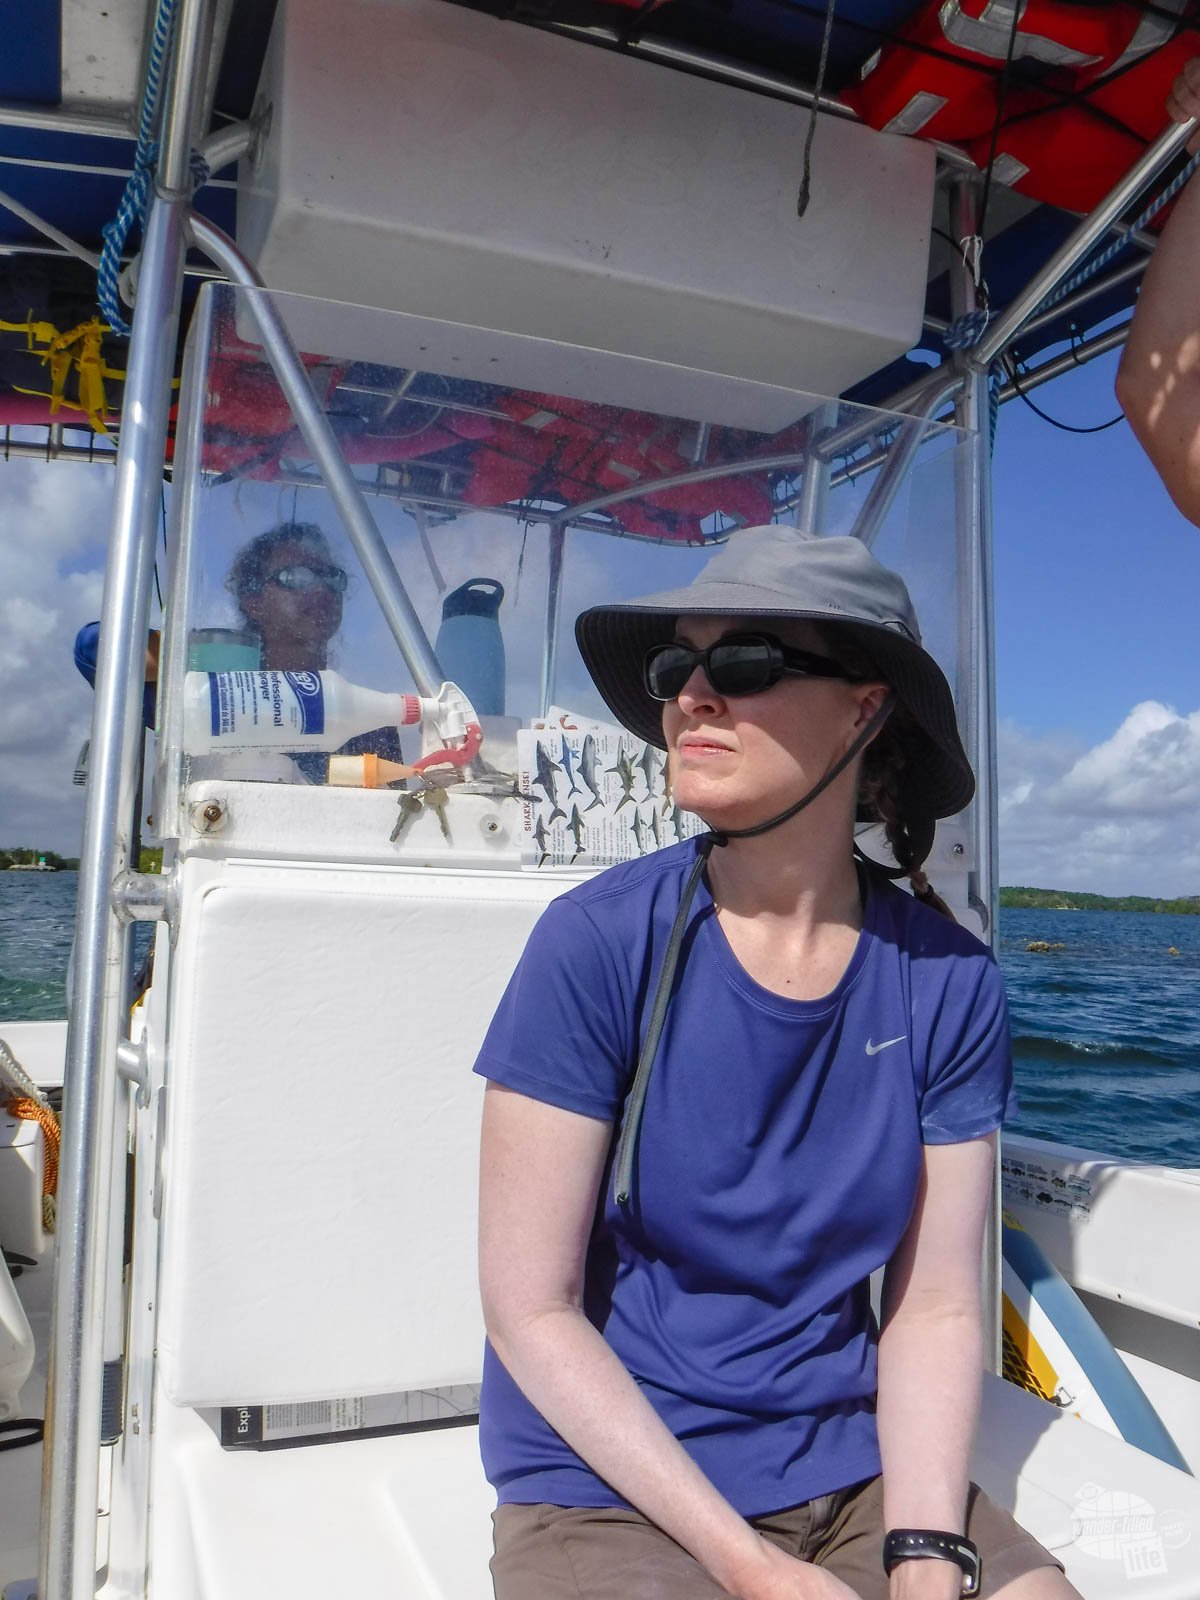 Bonnie on the boat during one of our Biscayne National Park tours.